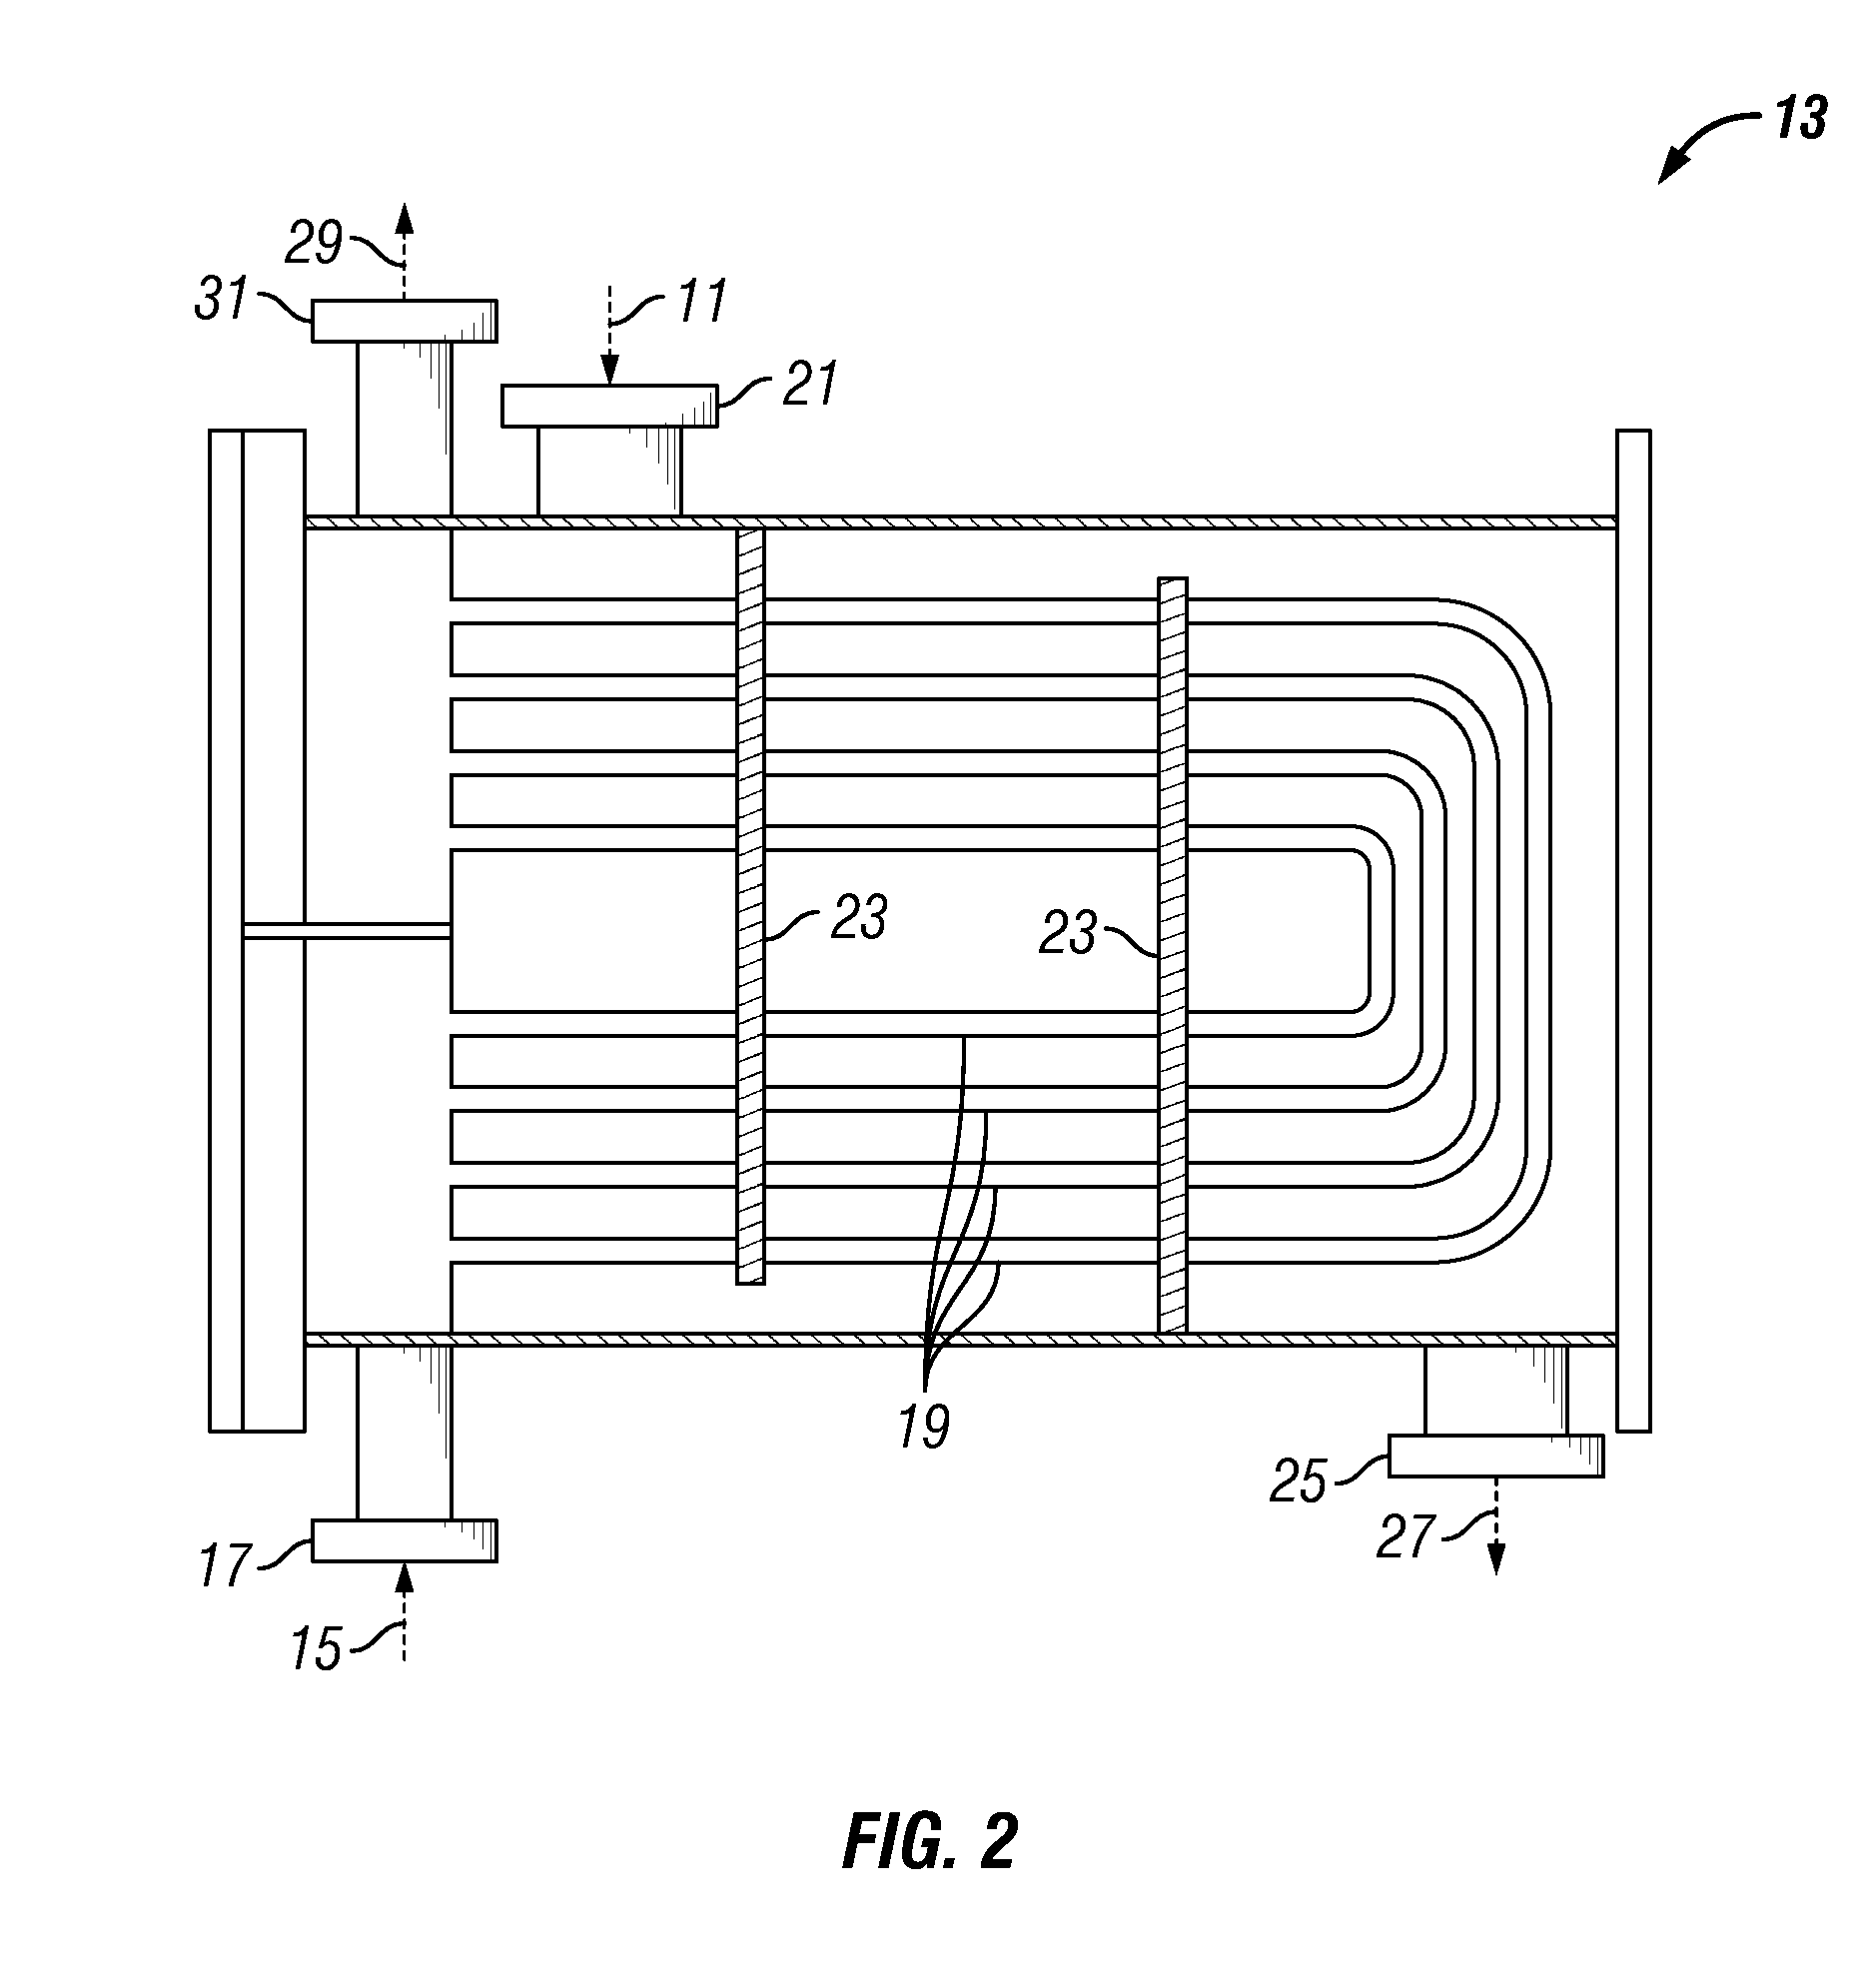 System and process for generation of electrical power